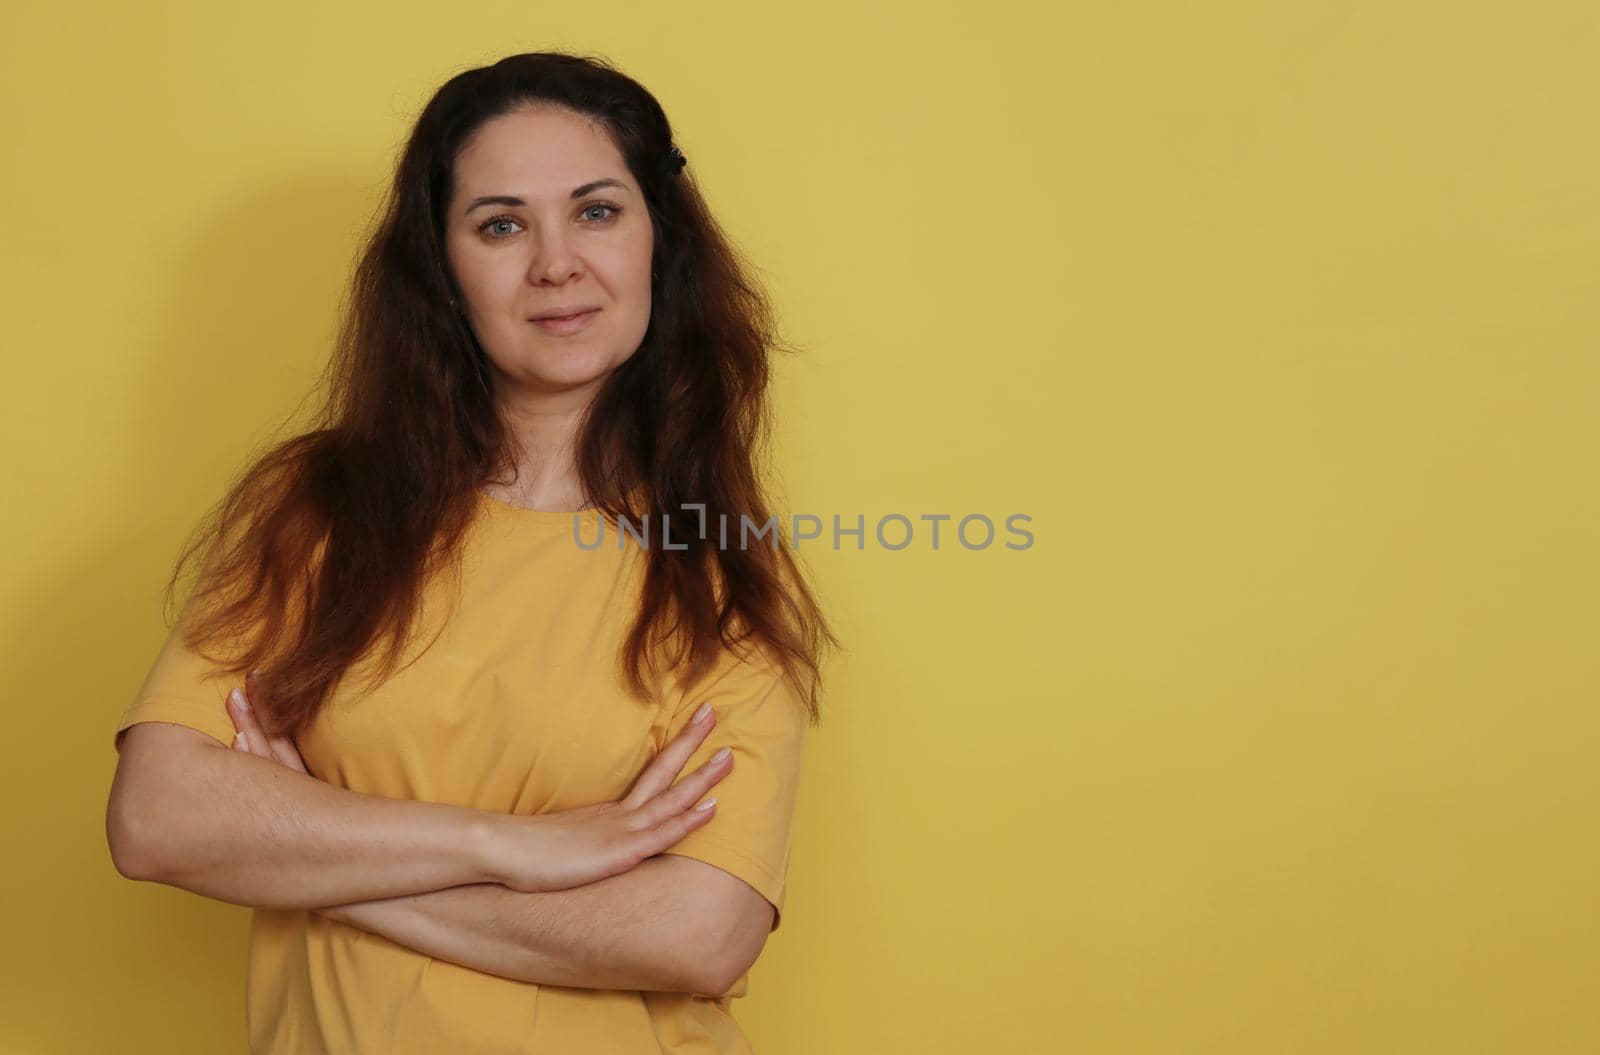 Pretty brunette 30-35 yo smiles tenderly, dressed in casual clothes, expresses positive emotions. Beautiful woman in yellow t-shirt with long dark hair on yellow paper background.